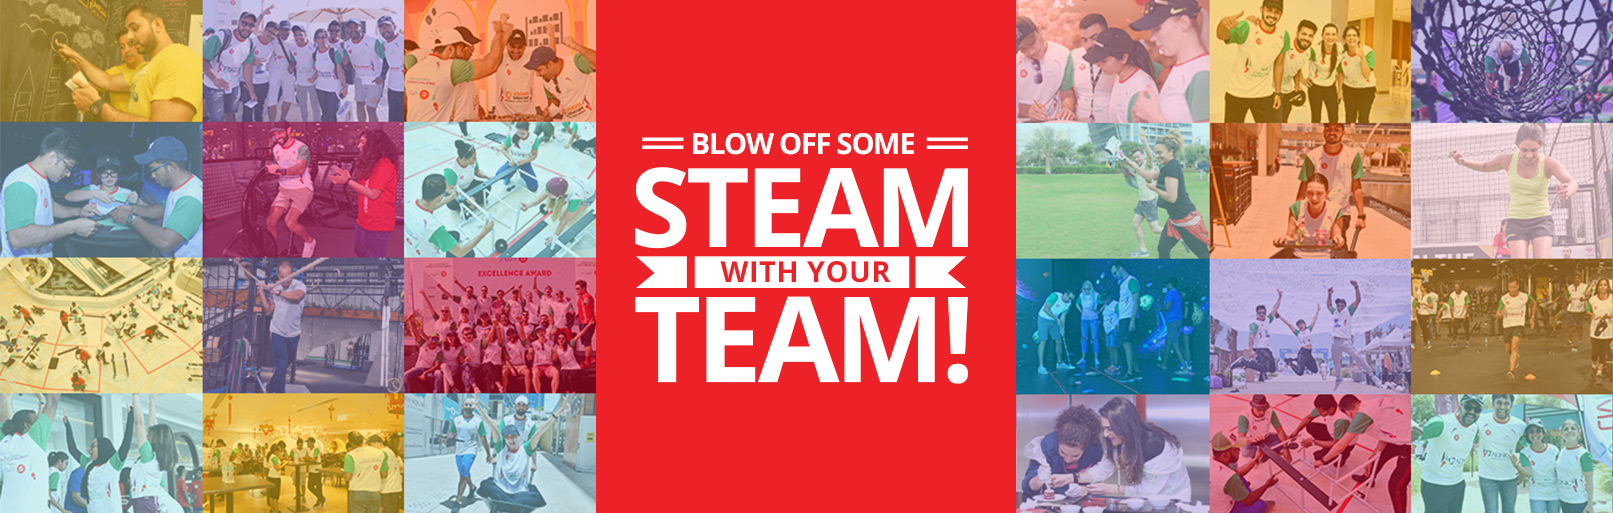 Blow off some team with your team members